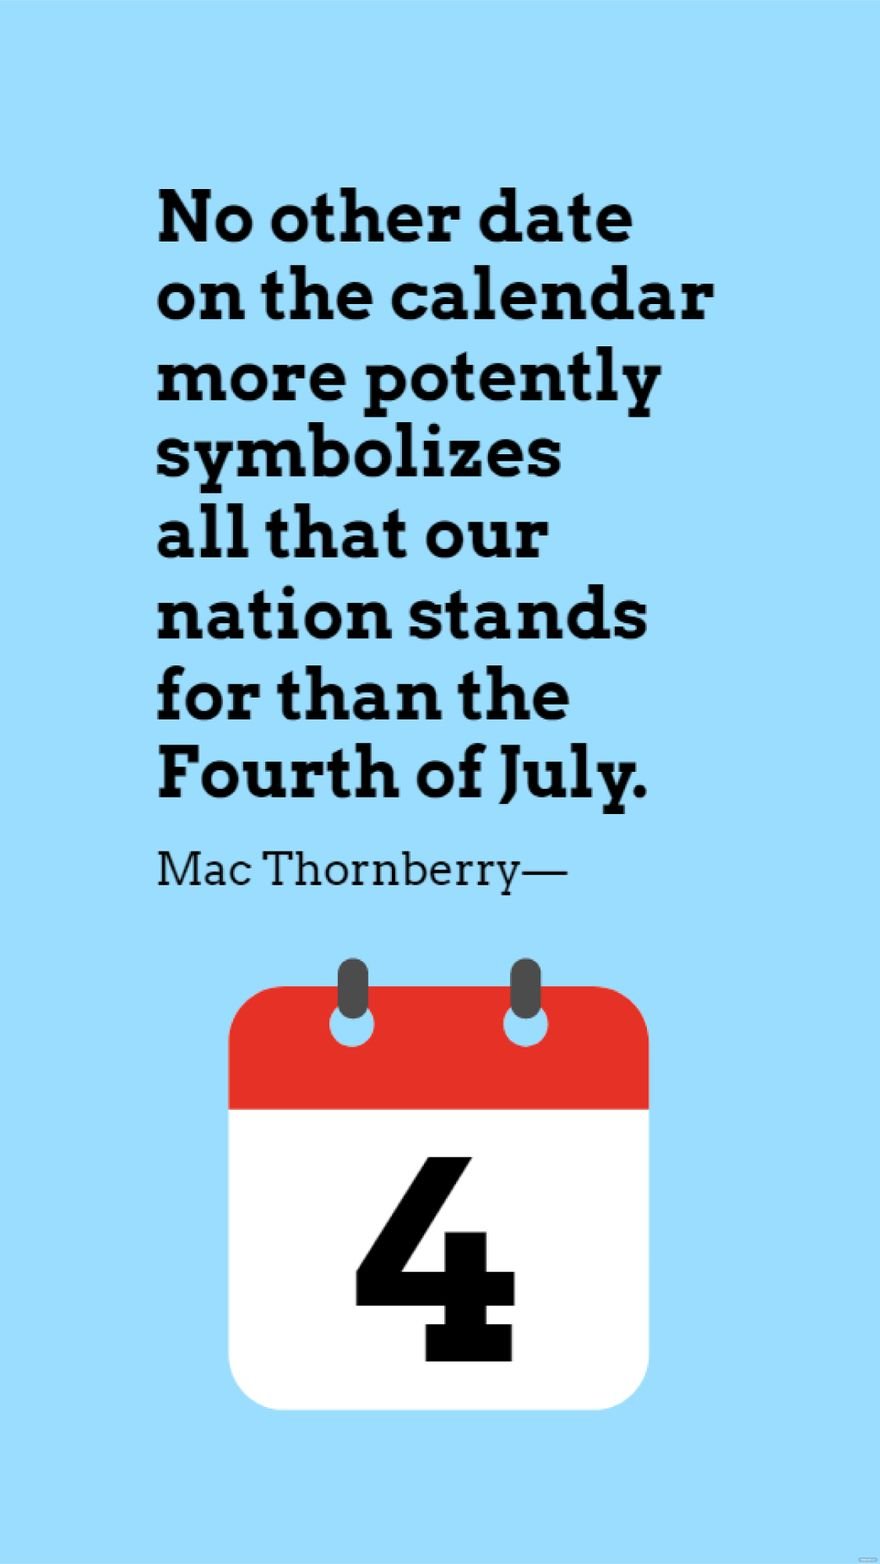 Free Mac Thornberry - No other date on the calendar more potently symbolizes all that our nation stands for than the Fourth of July. in JPG